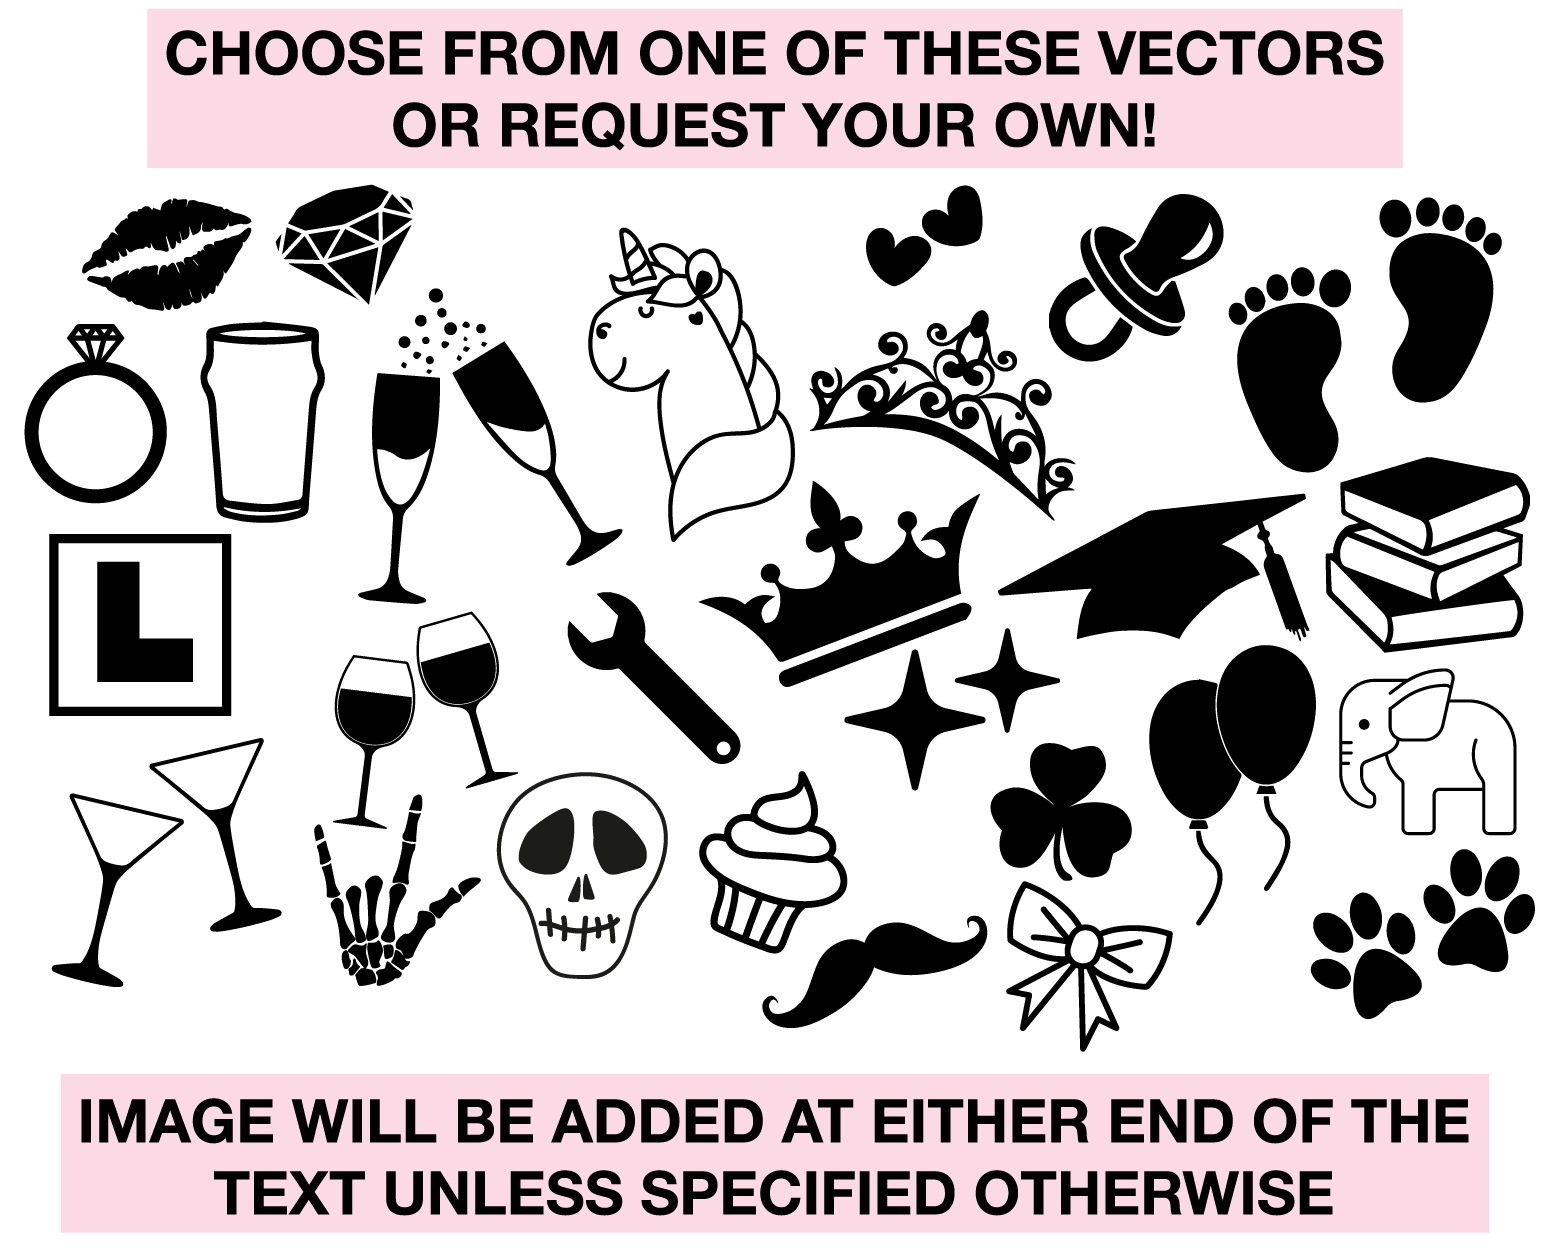 choose your own vector clipart image to go on your sash or request your own image